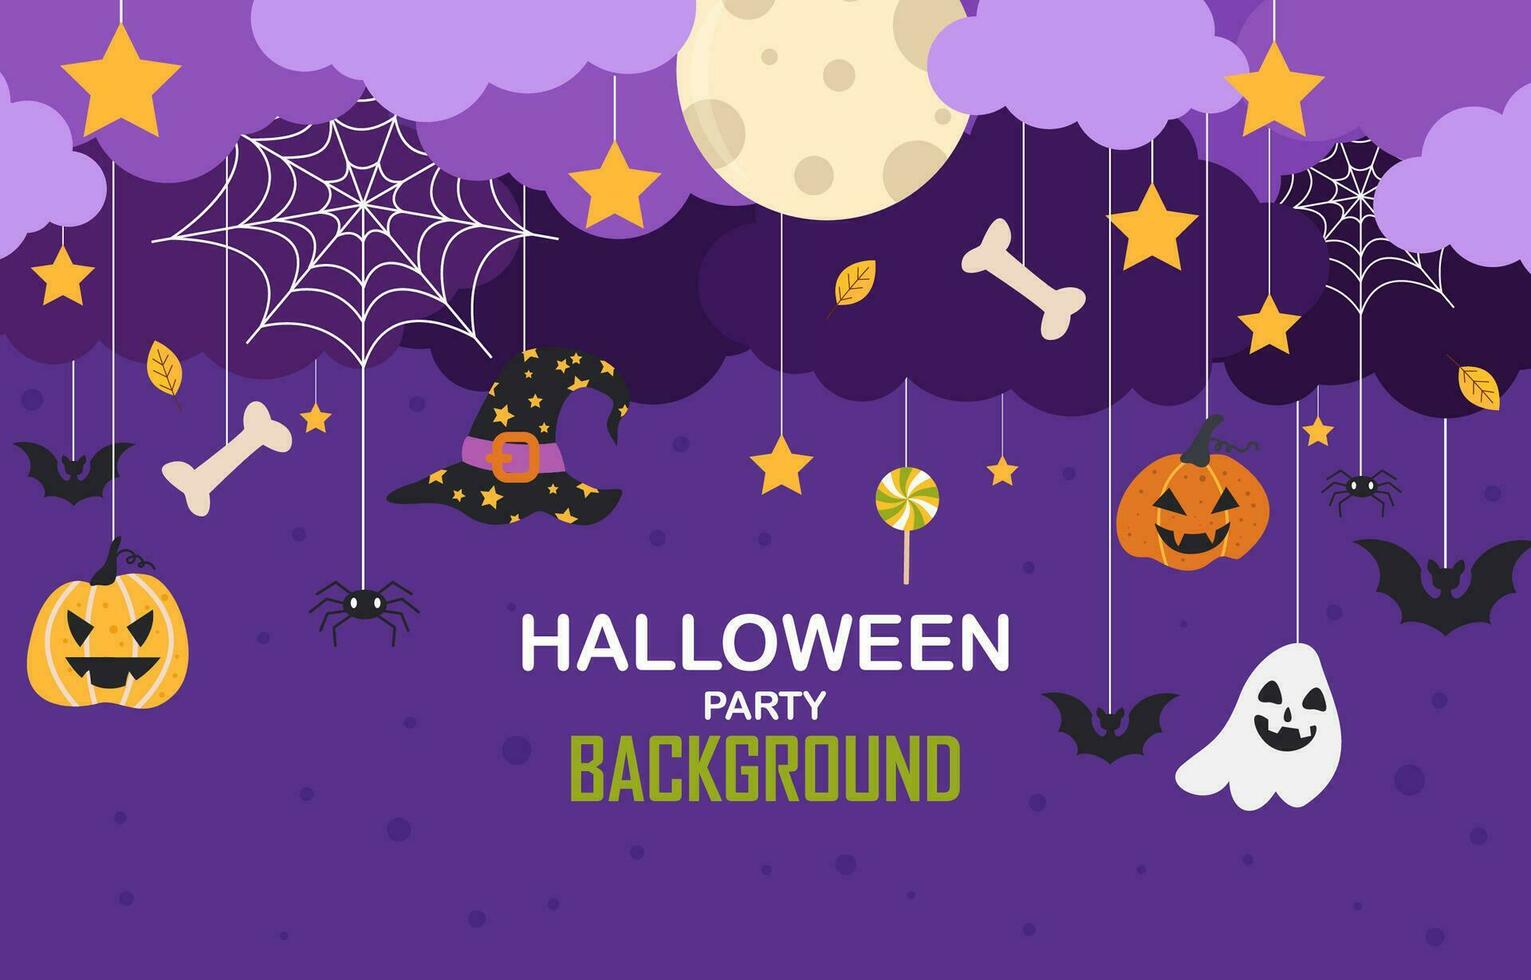 halloween party background with clouds, bats and pumpkins vector